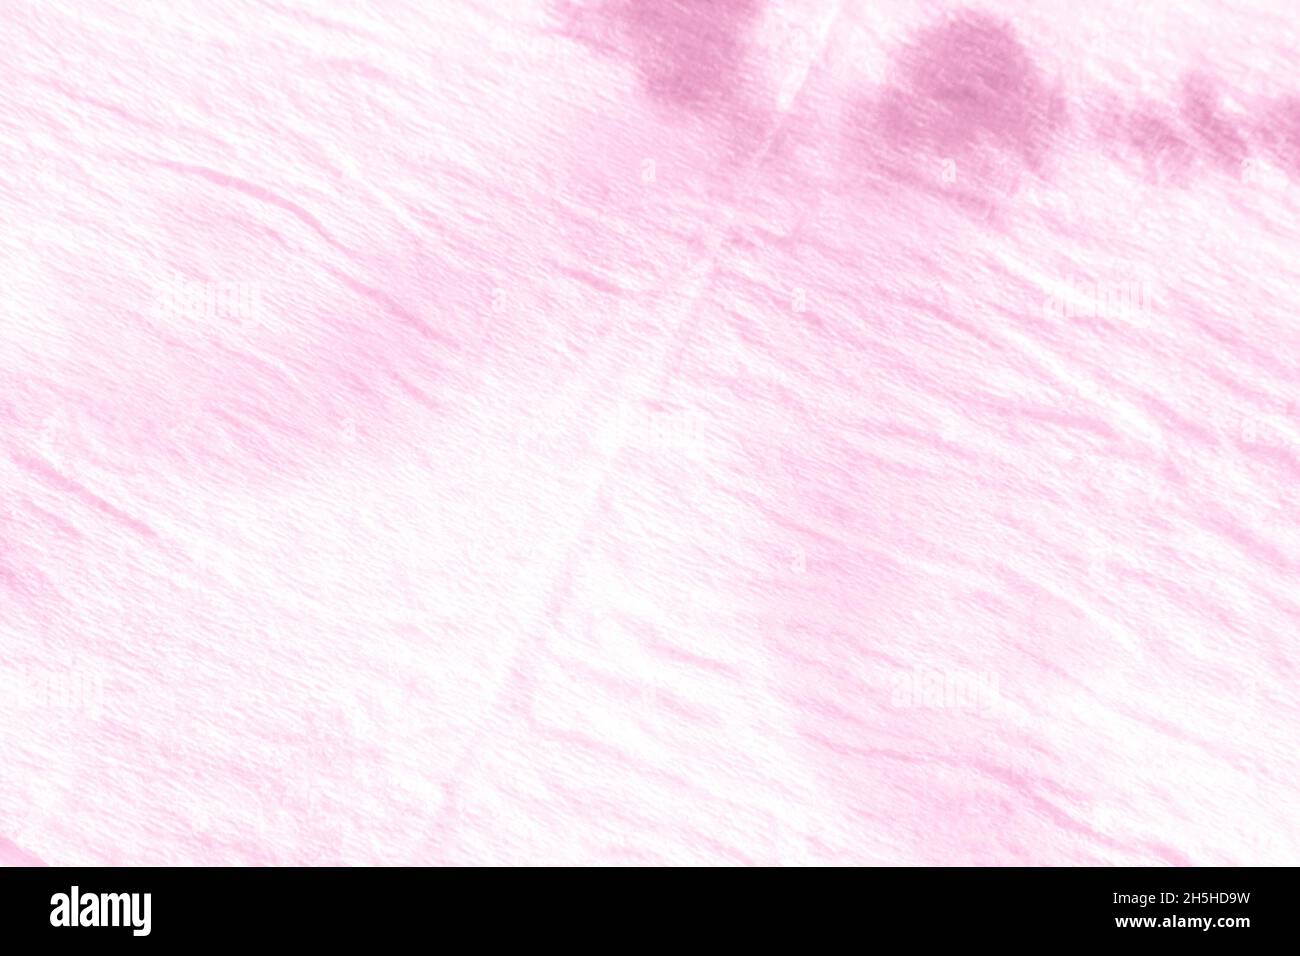 Pink Summer Ogee Ikat. Dyed Background. Watercolor Paint Blots. Ink Drawing Art. Ikat Design. Tie and Dye Shibori. Watercolor Paint Splatter. Pink Sum Stock Photo